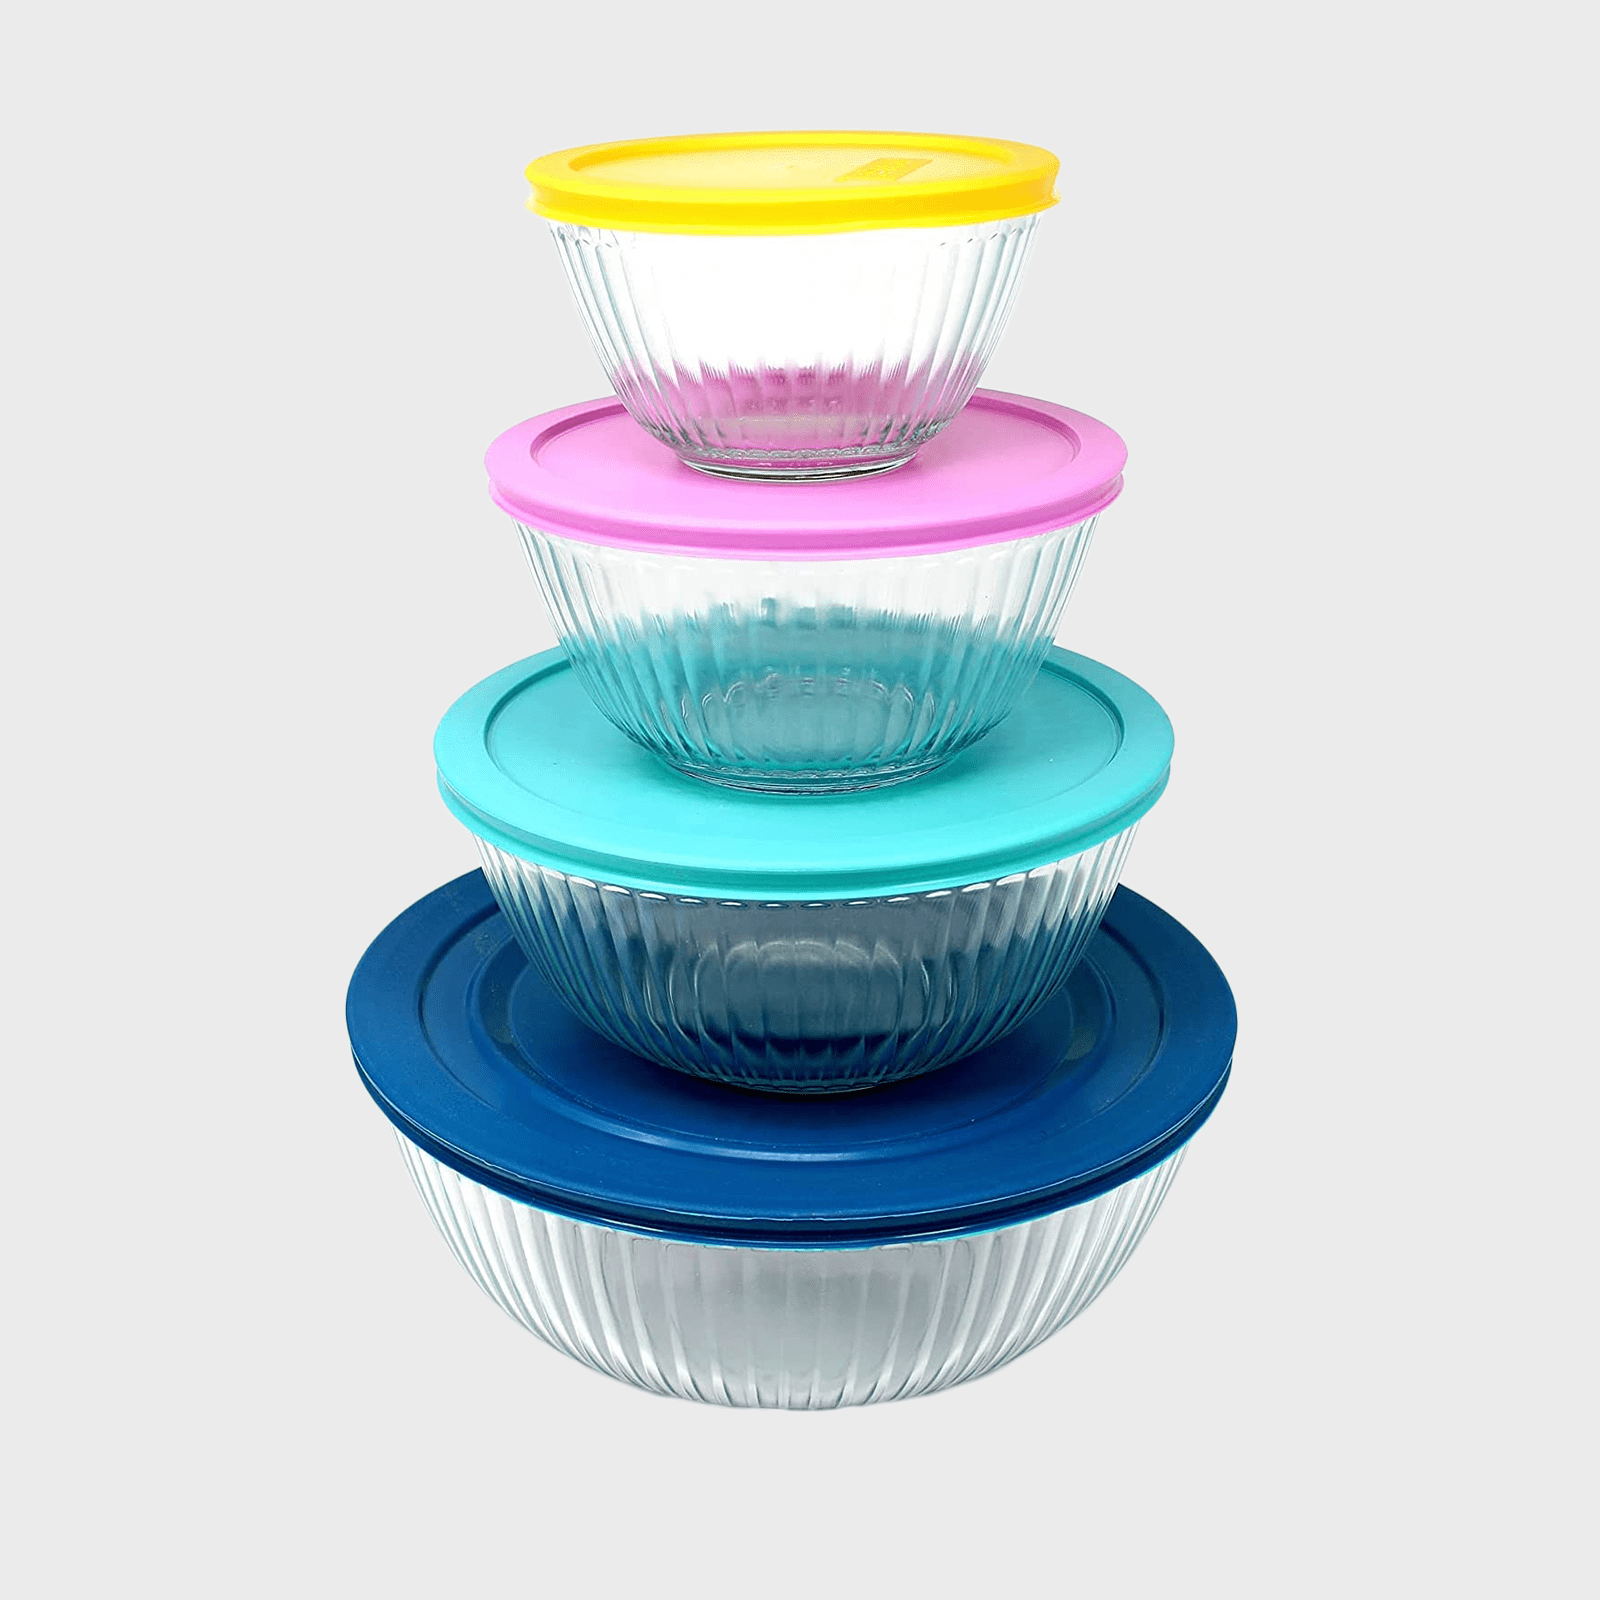 https://www.rd.com/wp-content/uploads/2022/10/pyrex-8-piece-100-yearas-glass-mixing-bowl-ecomm-via-amazon.com_.png?fit=700%2C700